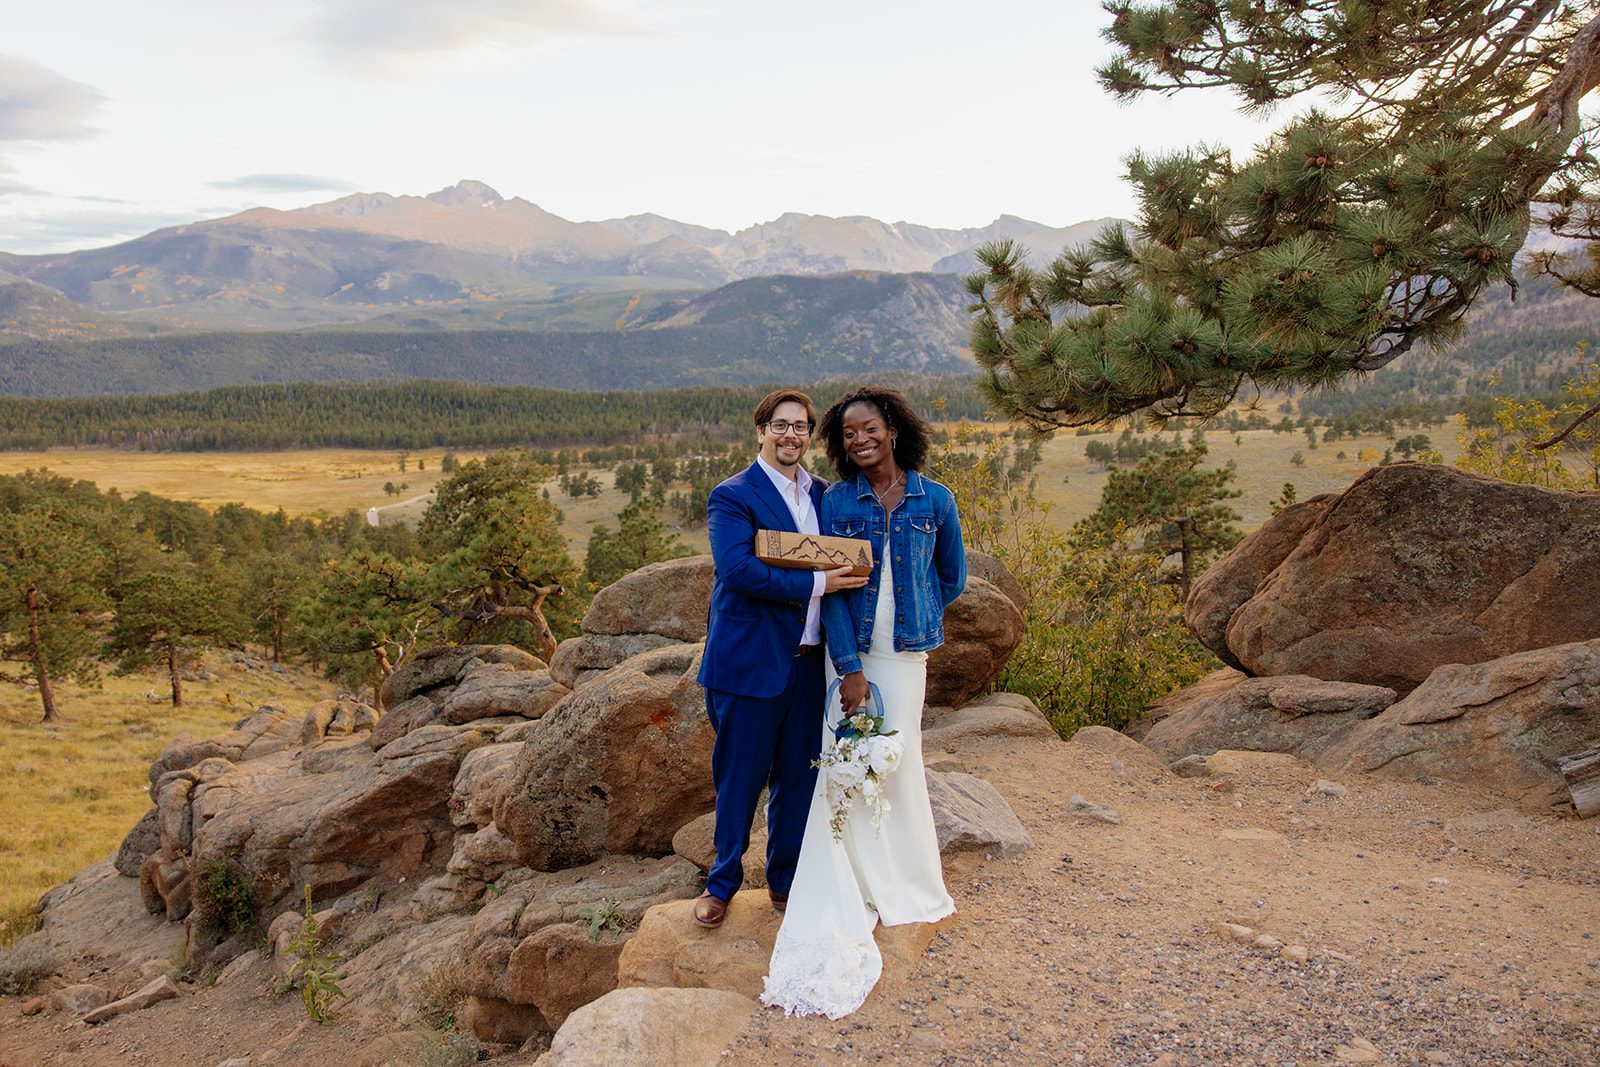 Bride and groom holding wine box in Rocky Mountain National Park from their Knoll Willows Elopement ceremony.